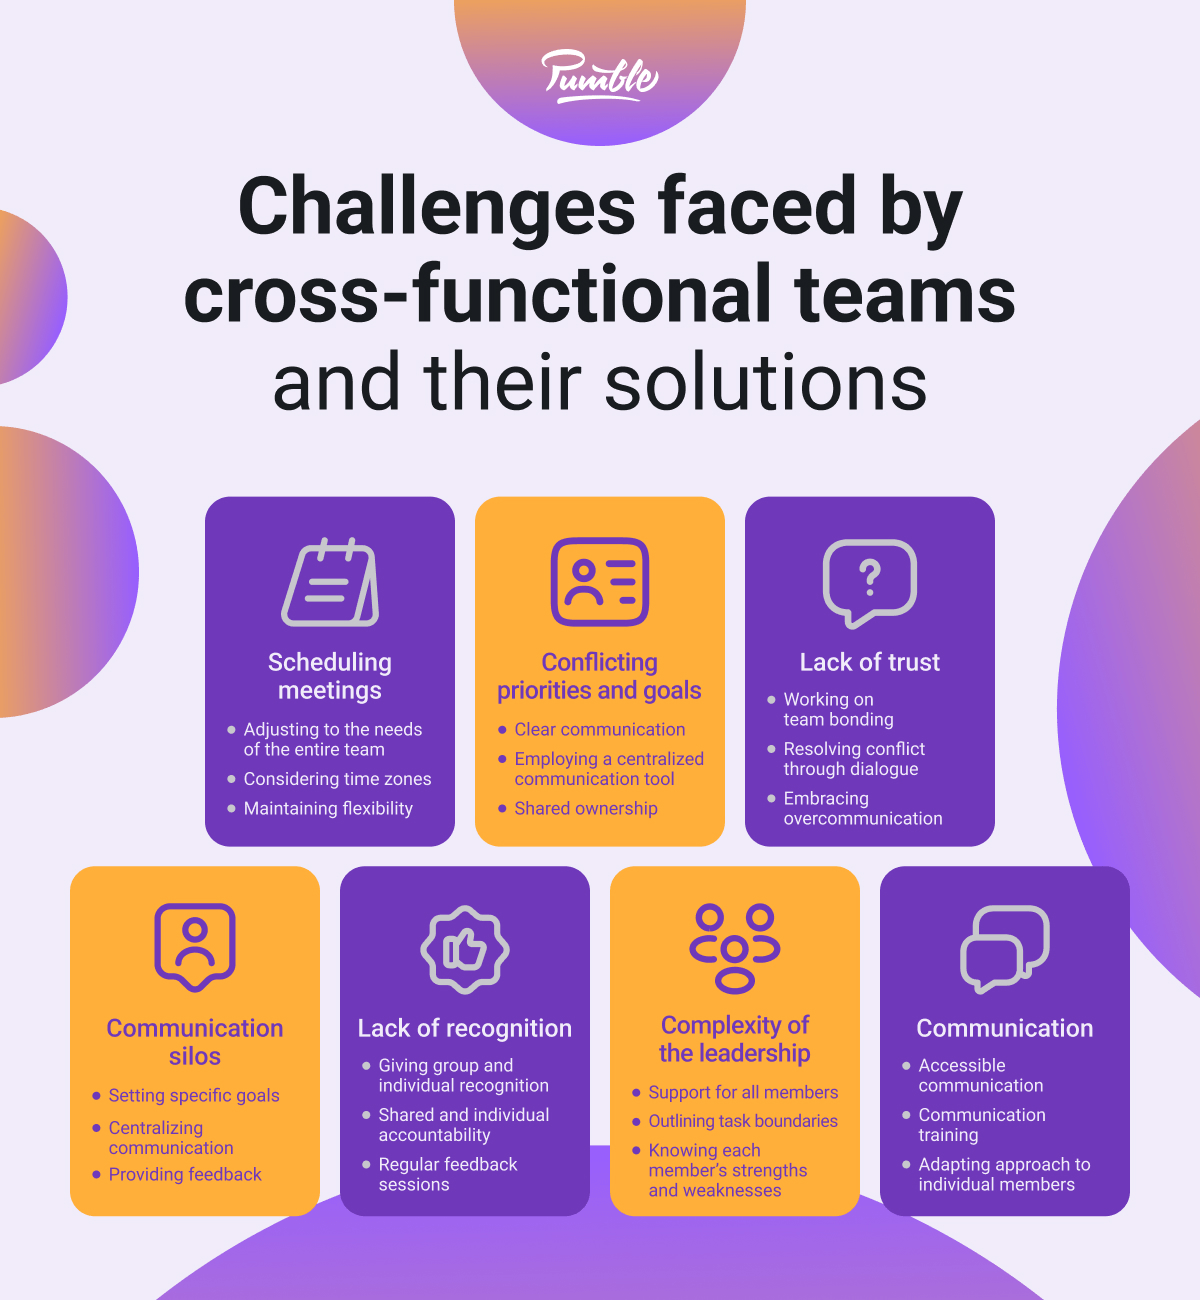 Challenges faced by cross-functional teams and their solutions